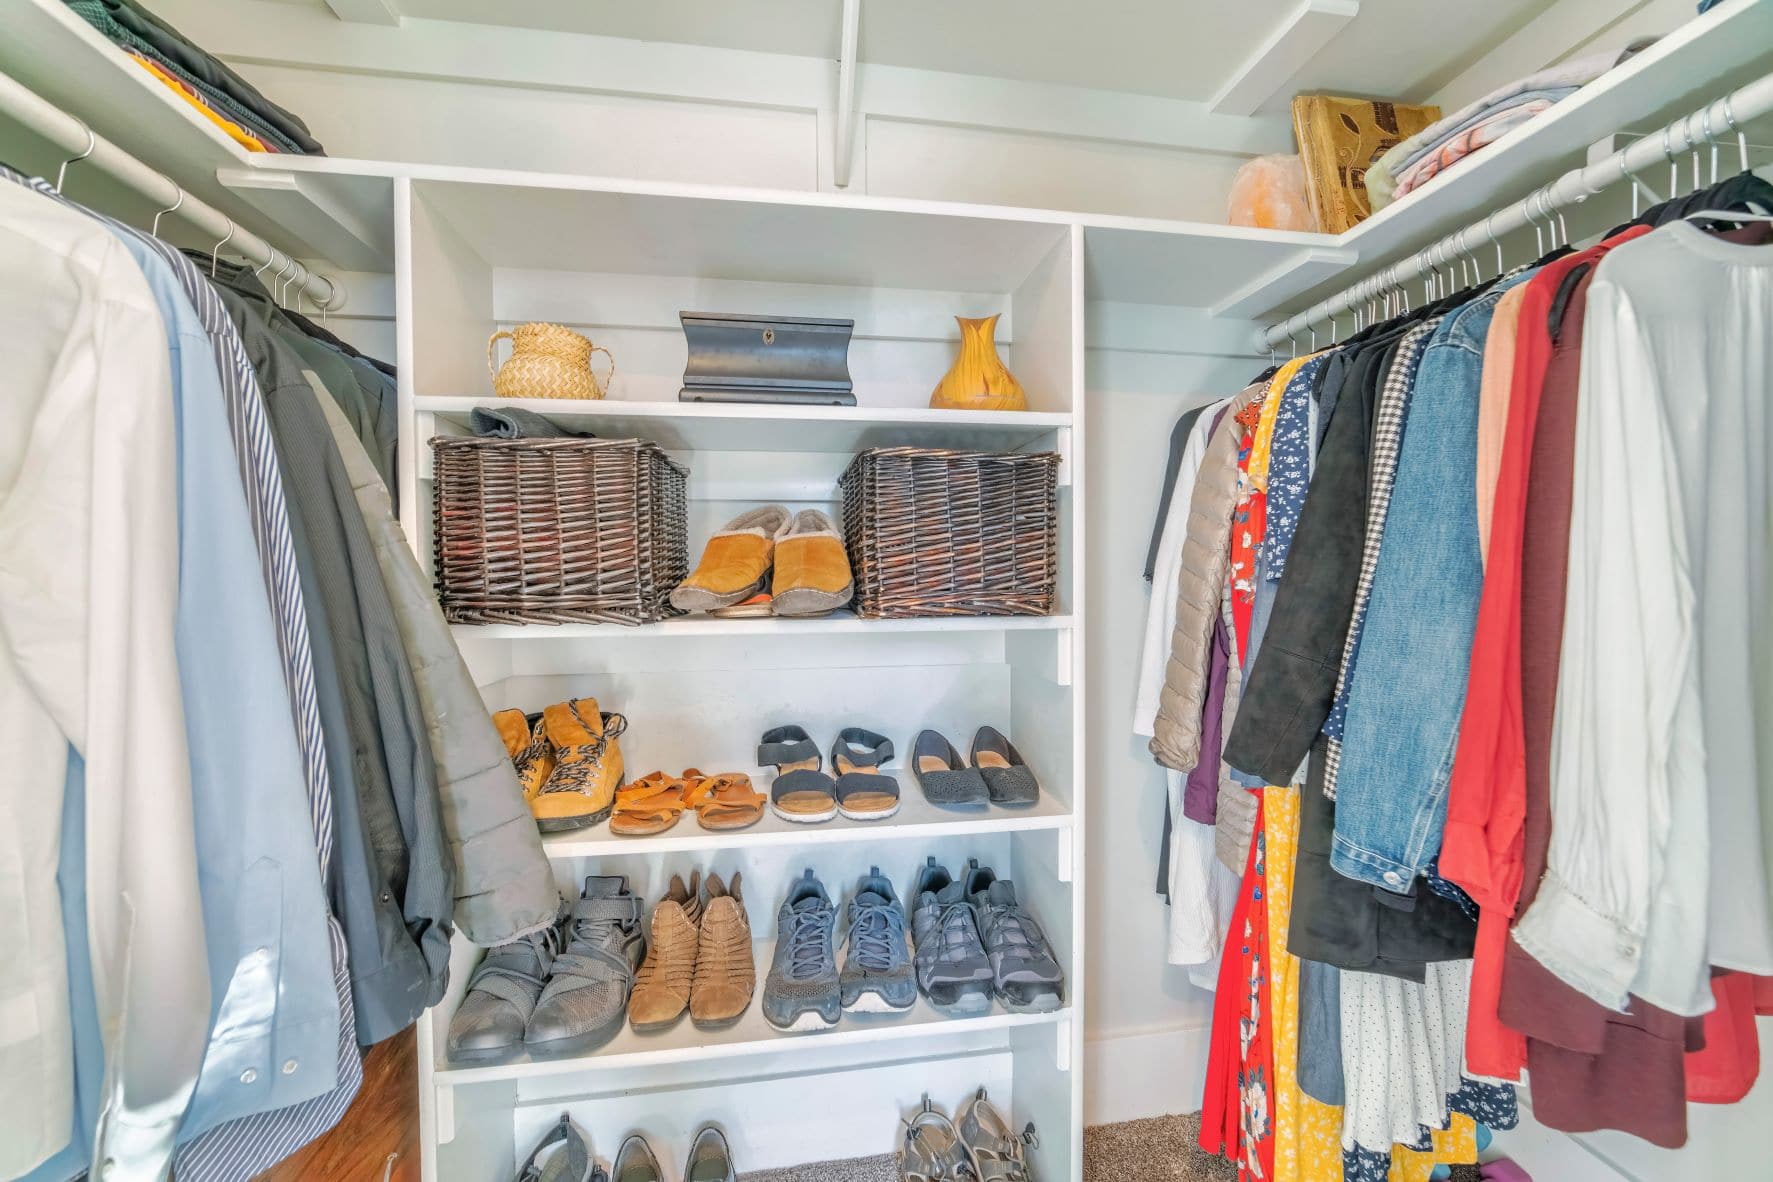 Custom closet with white shelving for shoes and hangers for clothing